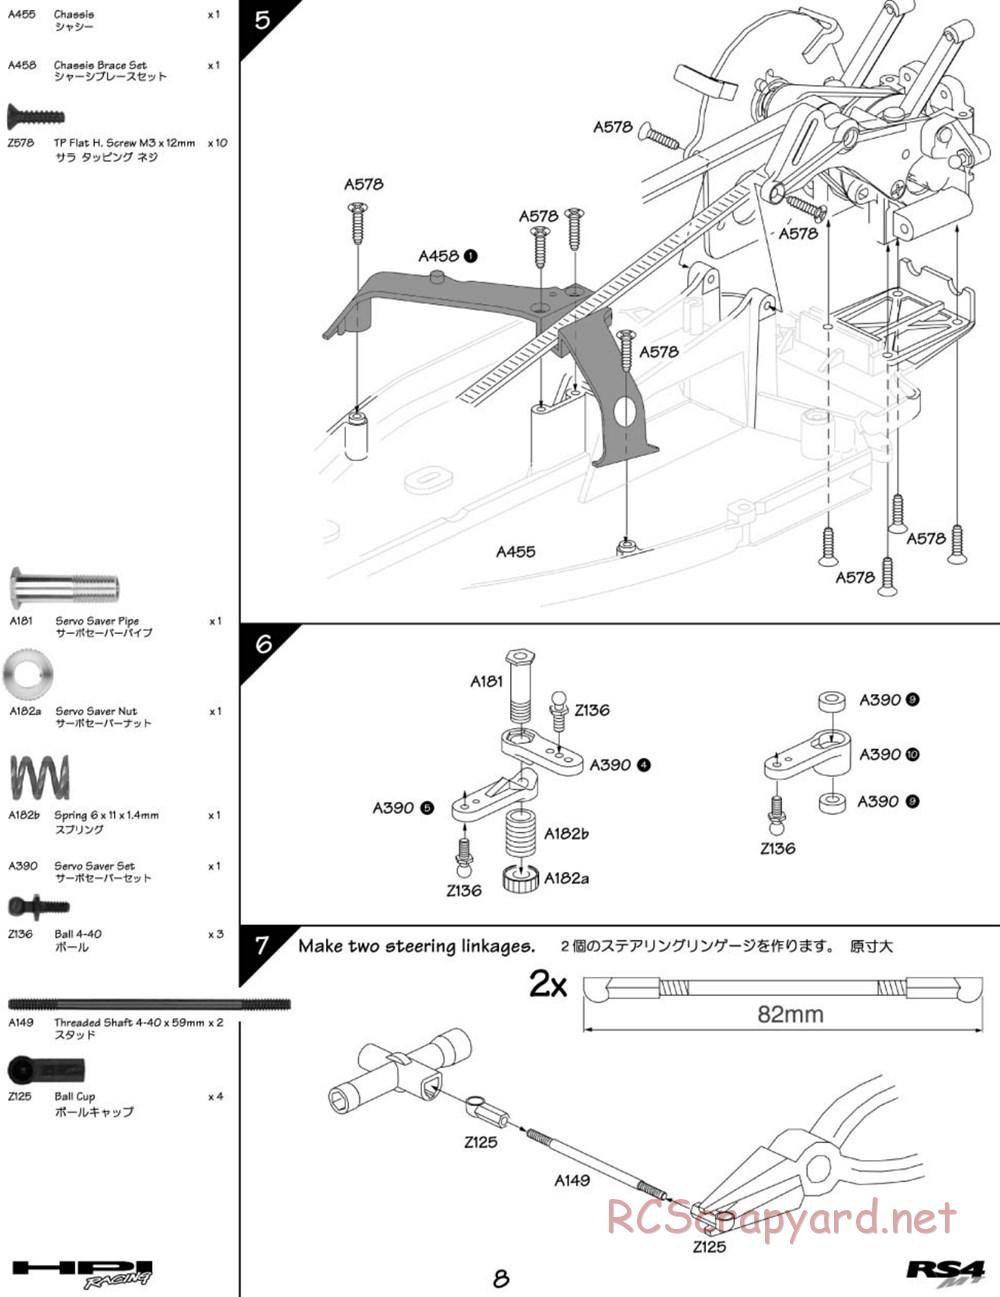 HPI - RS4 MT - Manual - Page 8